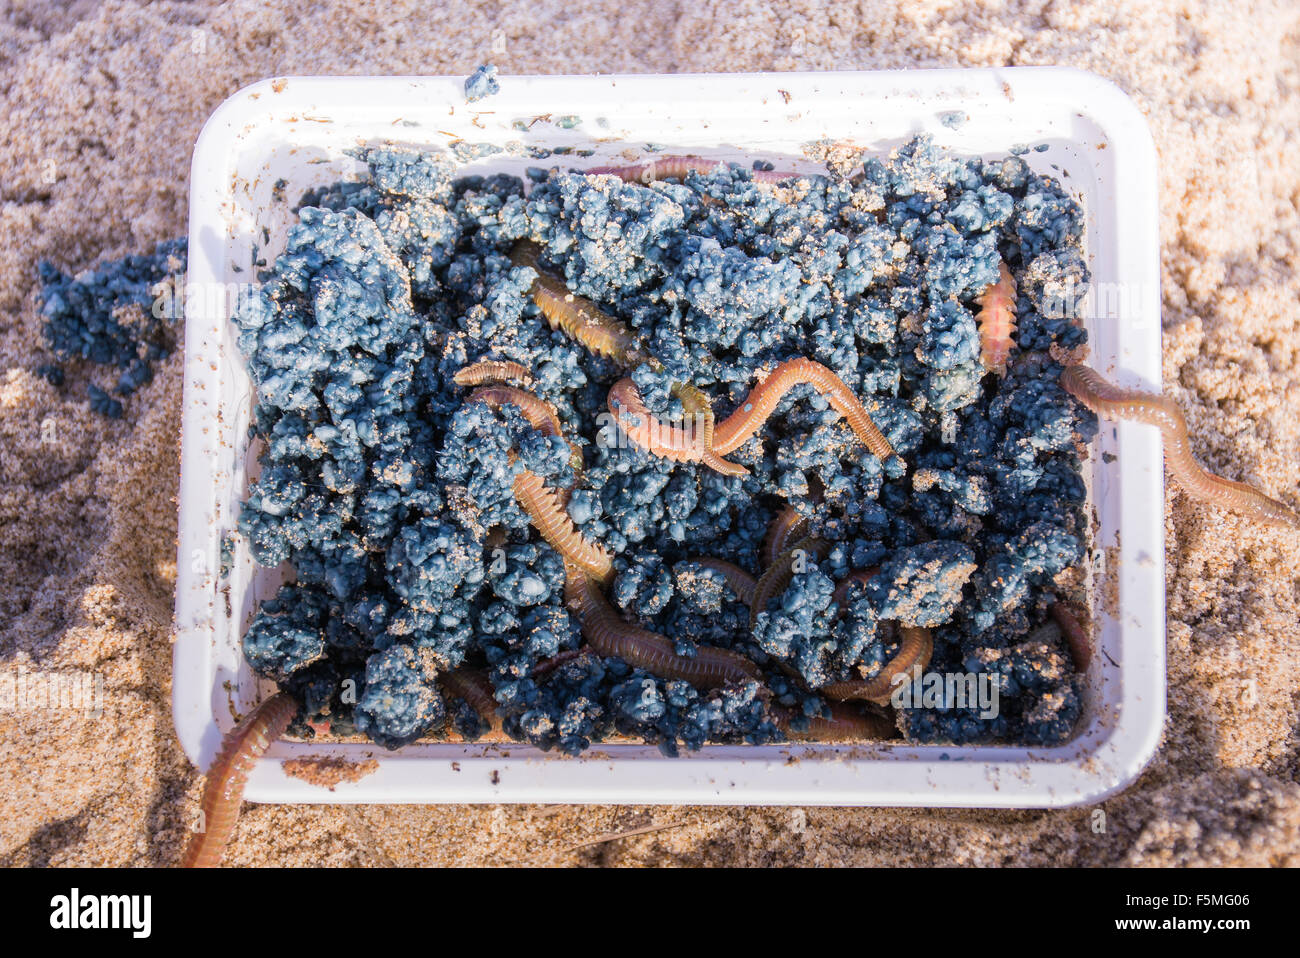 A box with alive worms bait for sea fishing. Stock Photo